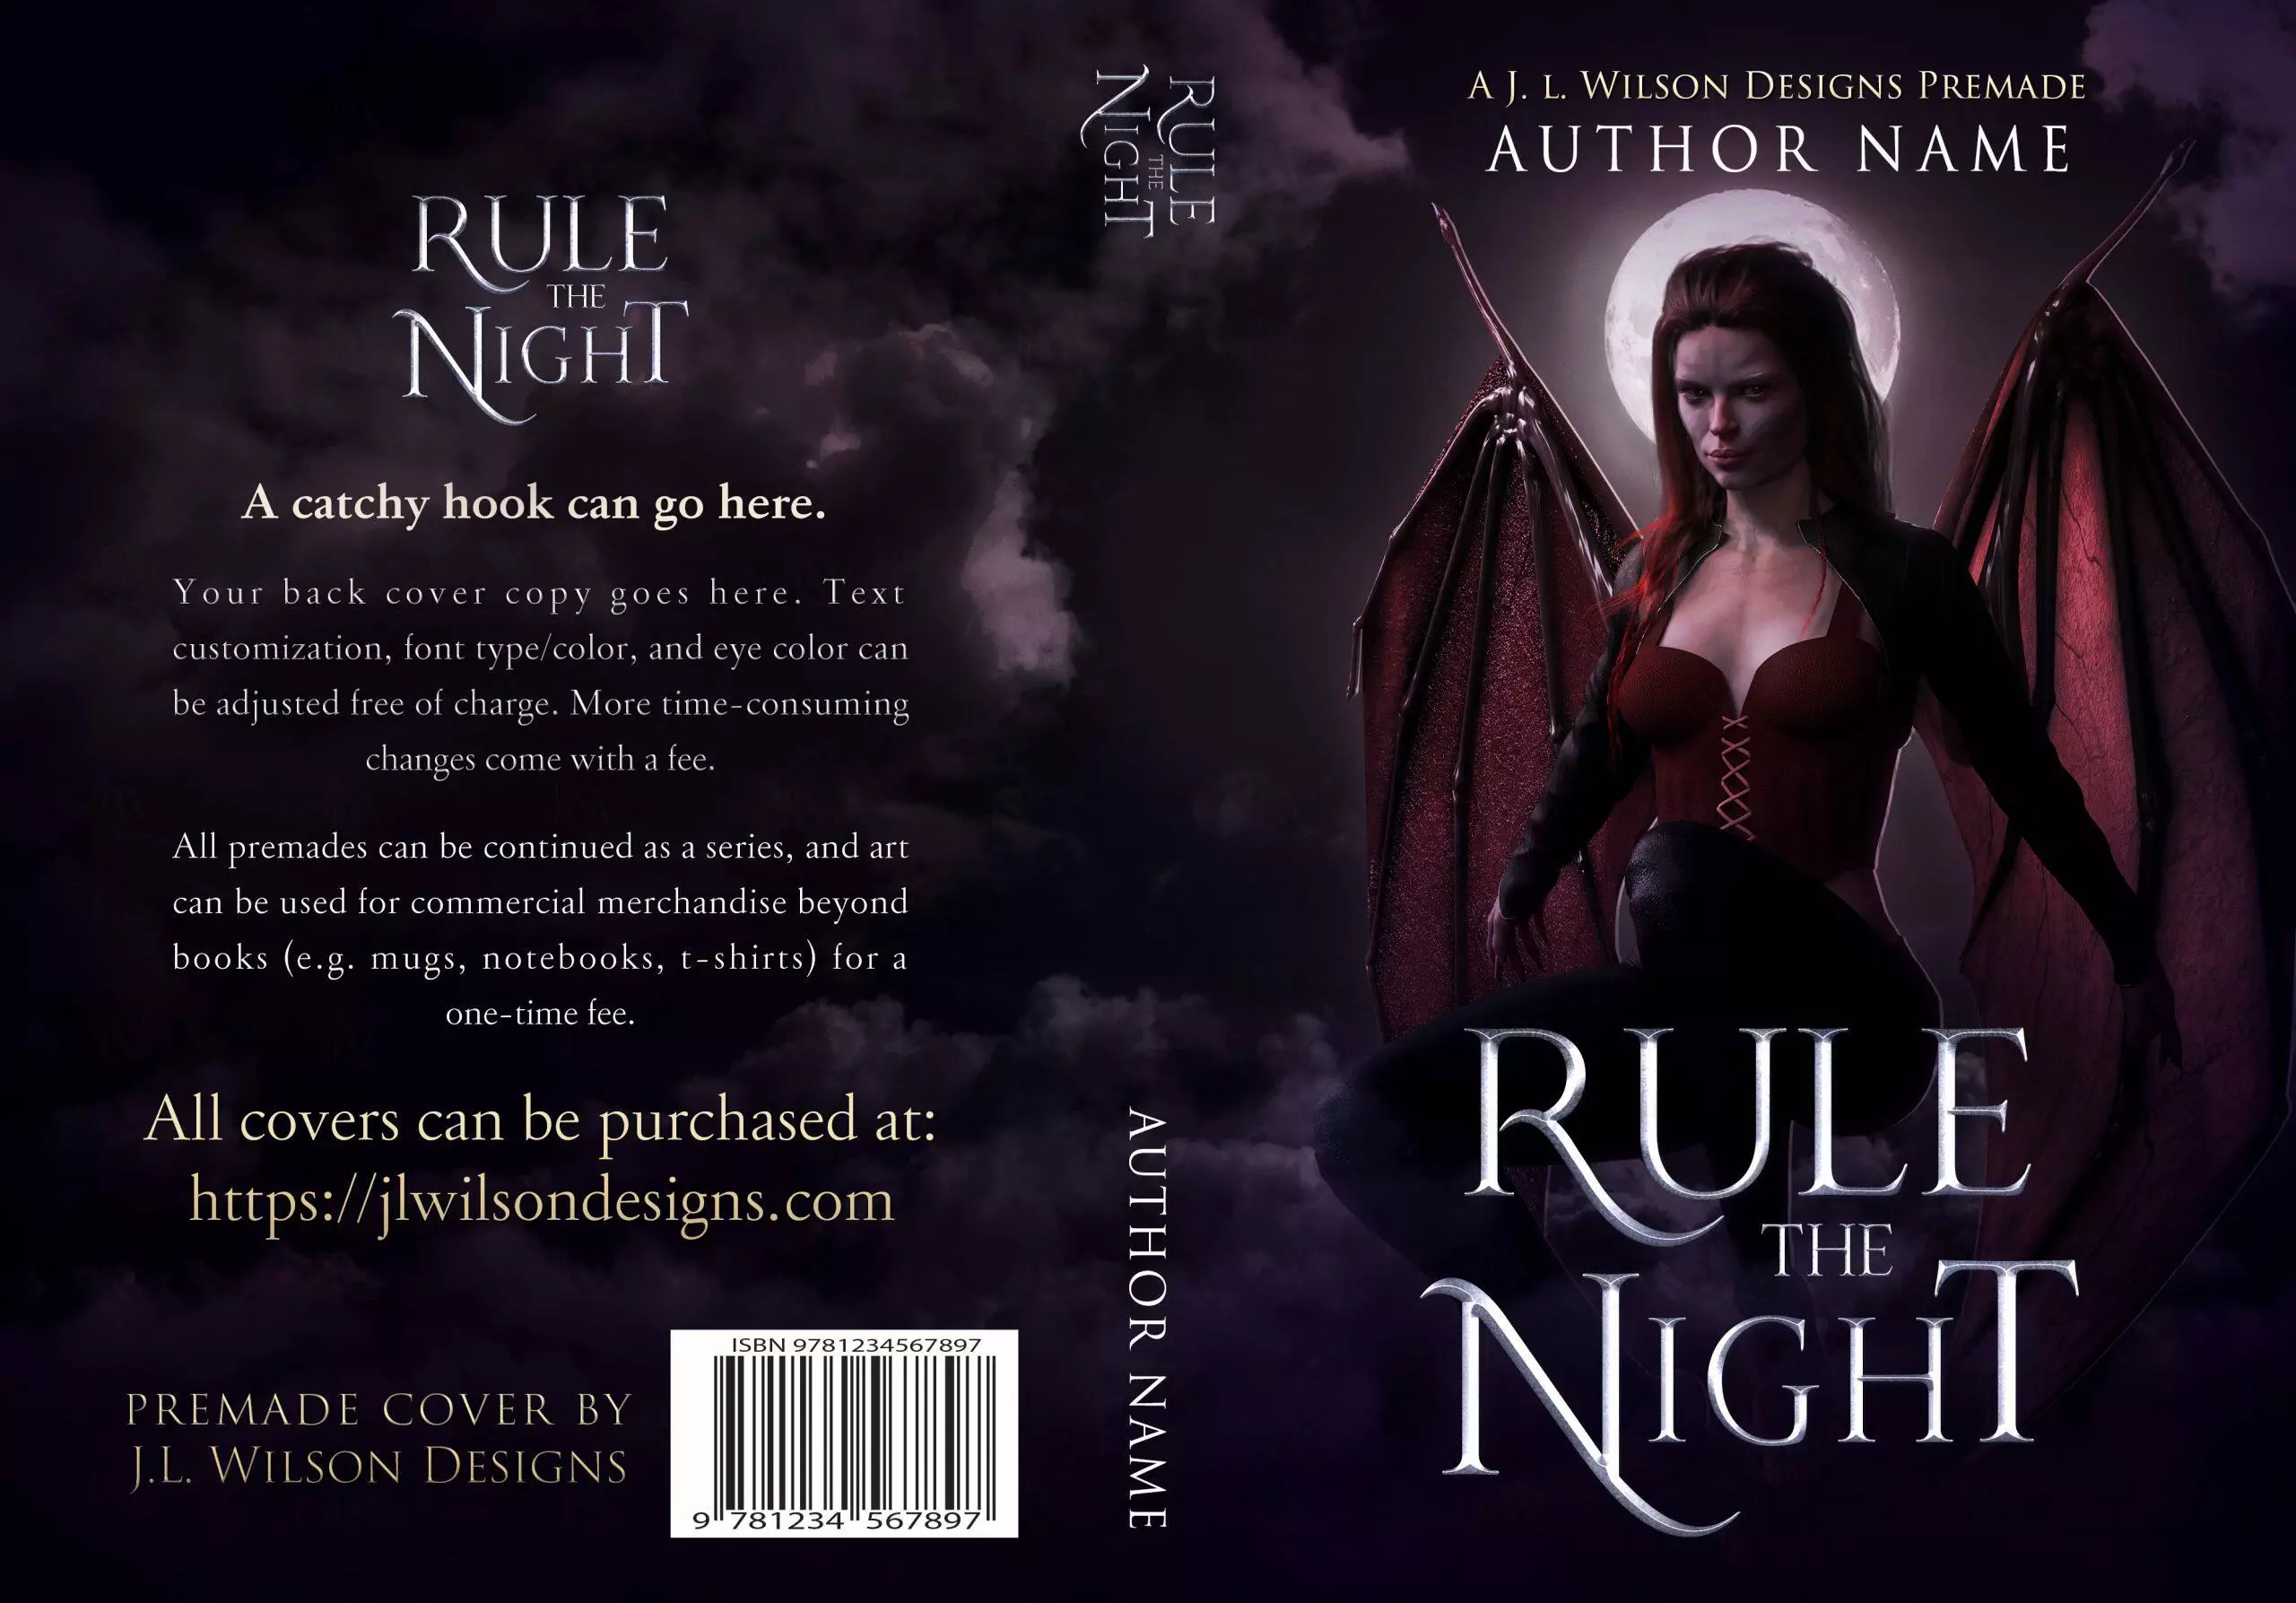 A dark fantasy book cover featuring a seductive demon woman with wings flying at night